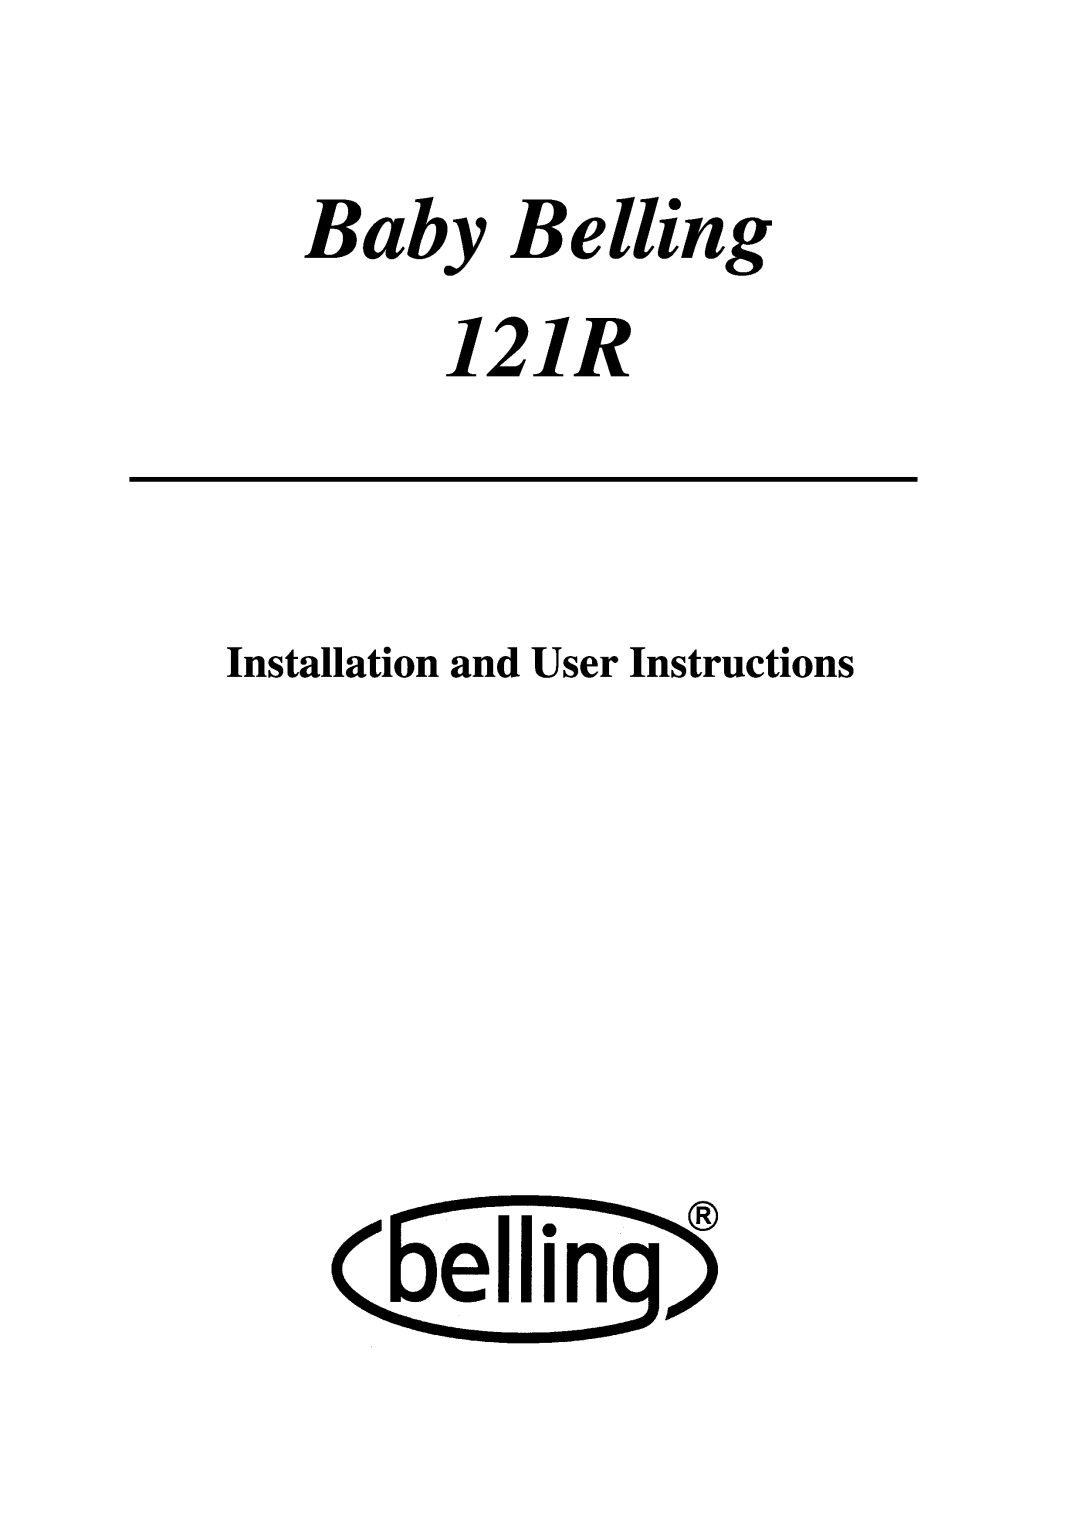 Glen Dimplex Home Appliances Ltd manual Baby Belling 121R, Installation and User Instructions 